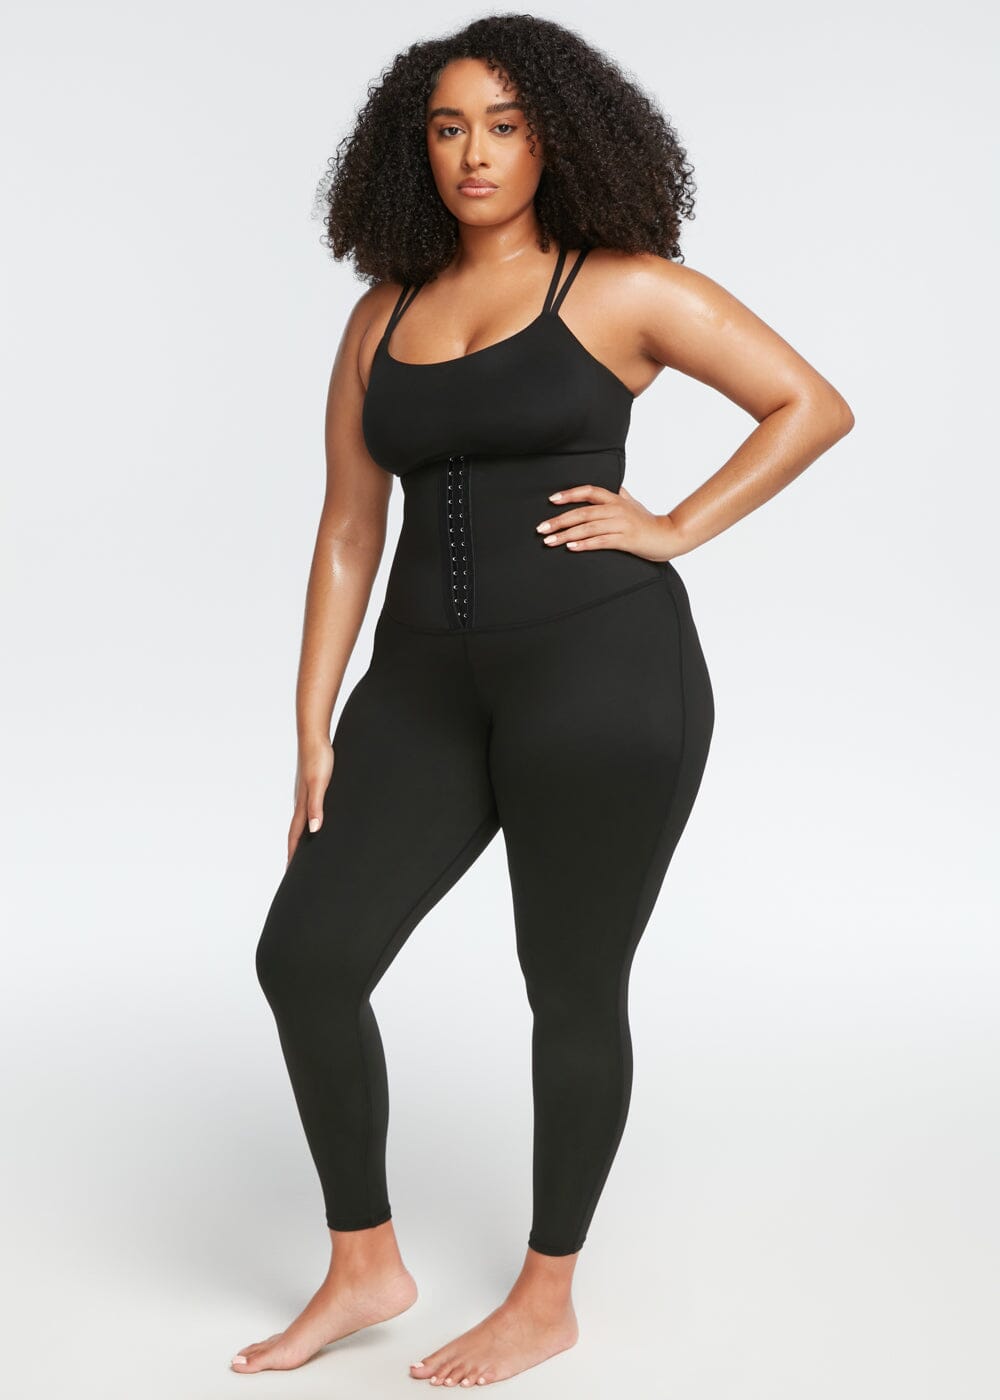 Thermo Sauna Compressing Leggings - She's Waisted